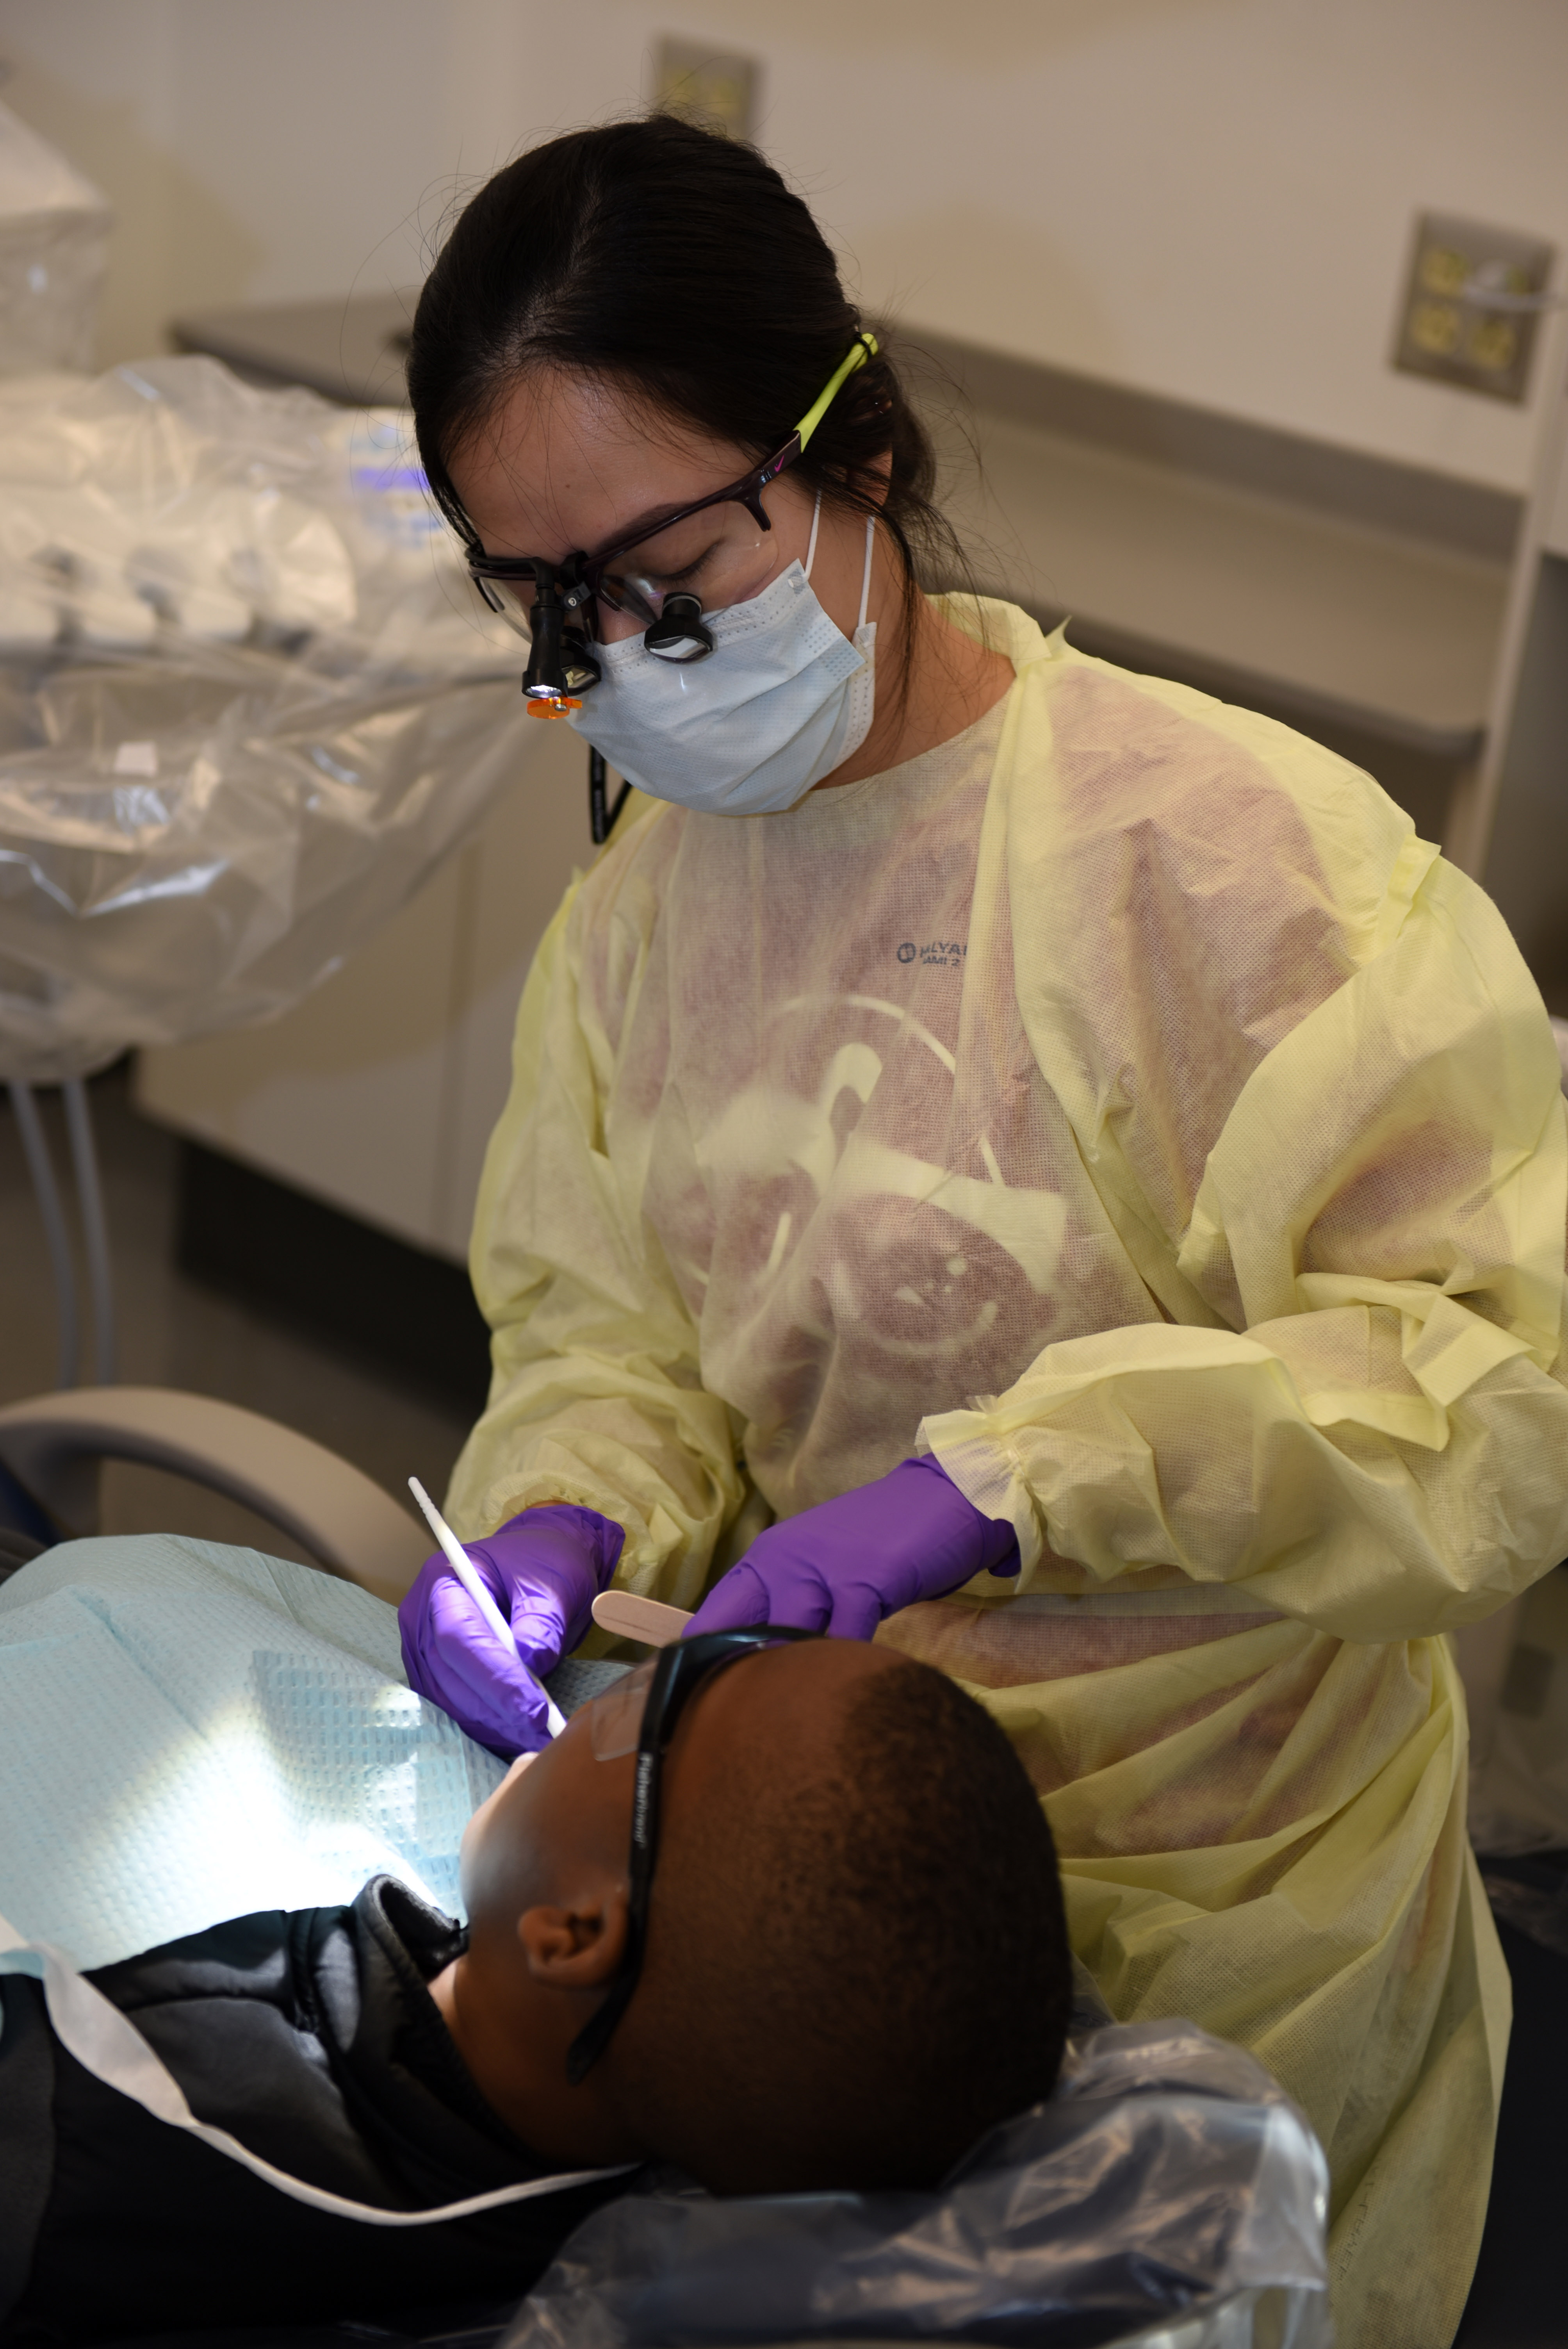 Student dentists from Indiana University School of Dentistry provide oral health care to children as part of Give Kids A Smile in 2019.